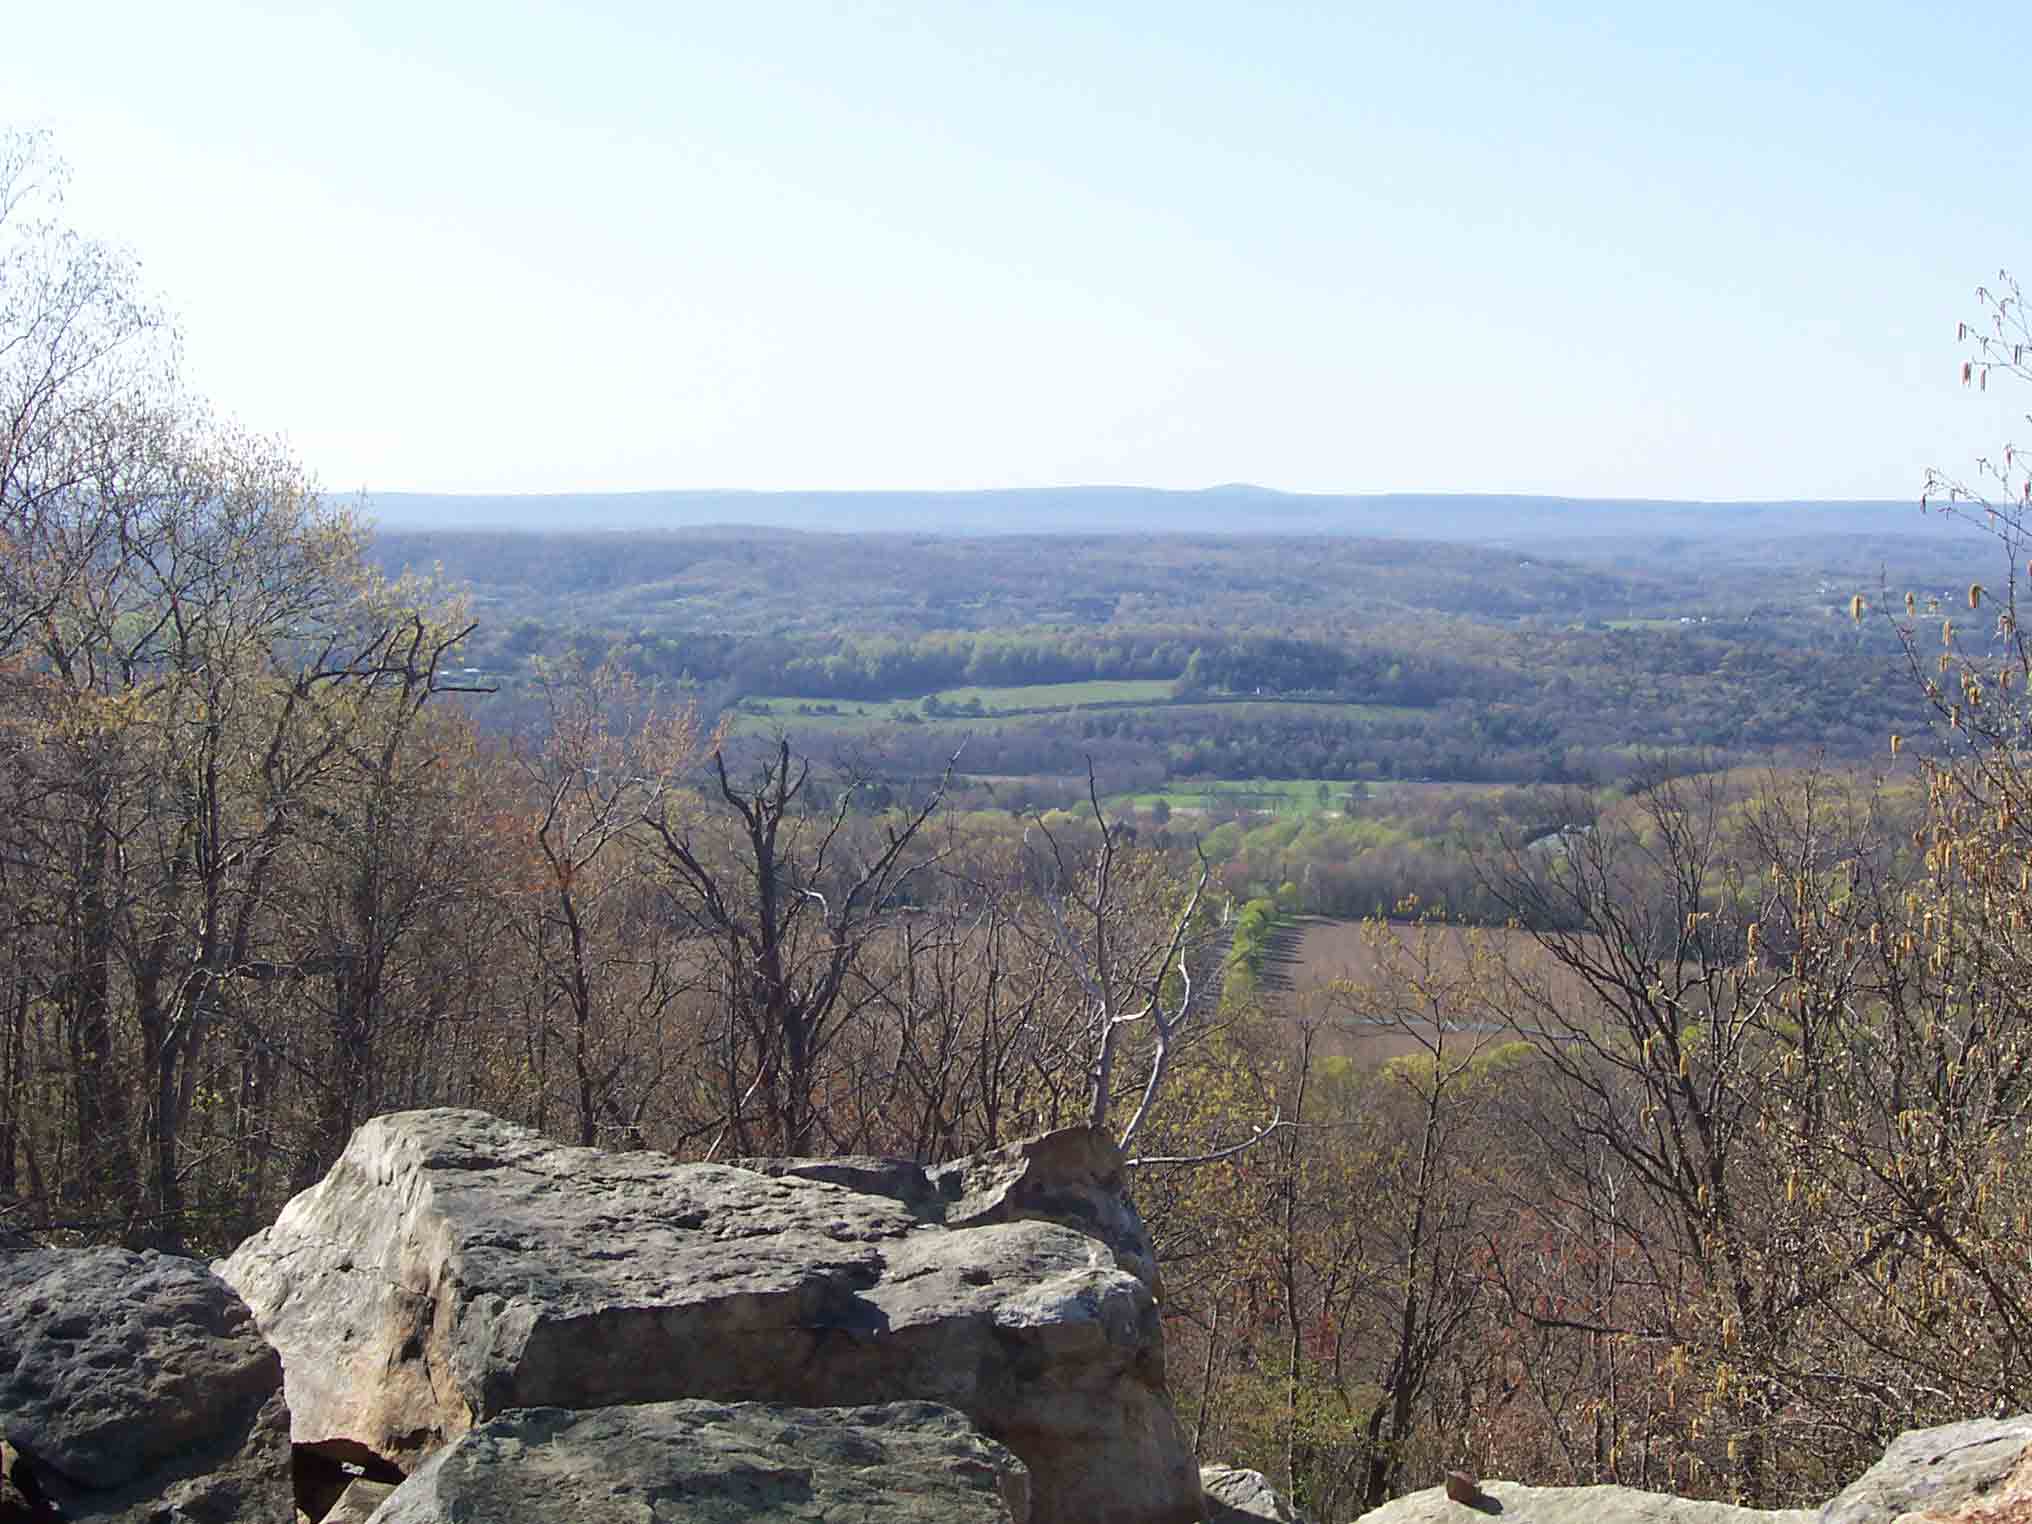 mm 0.8 - View North from Lookout Rocks.  Courtesy dlcul@conncoll.edu